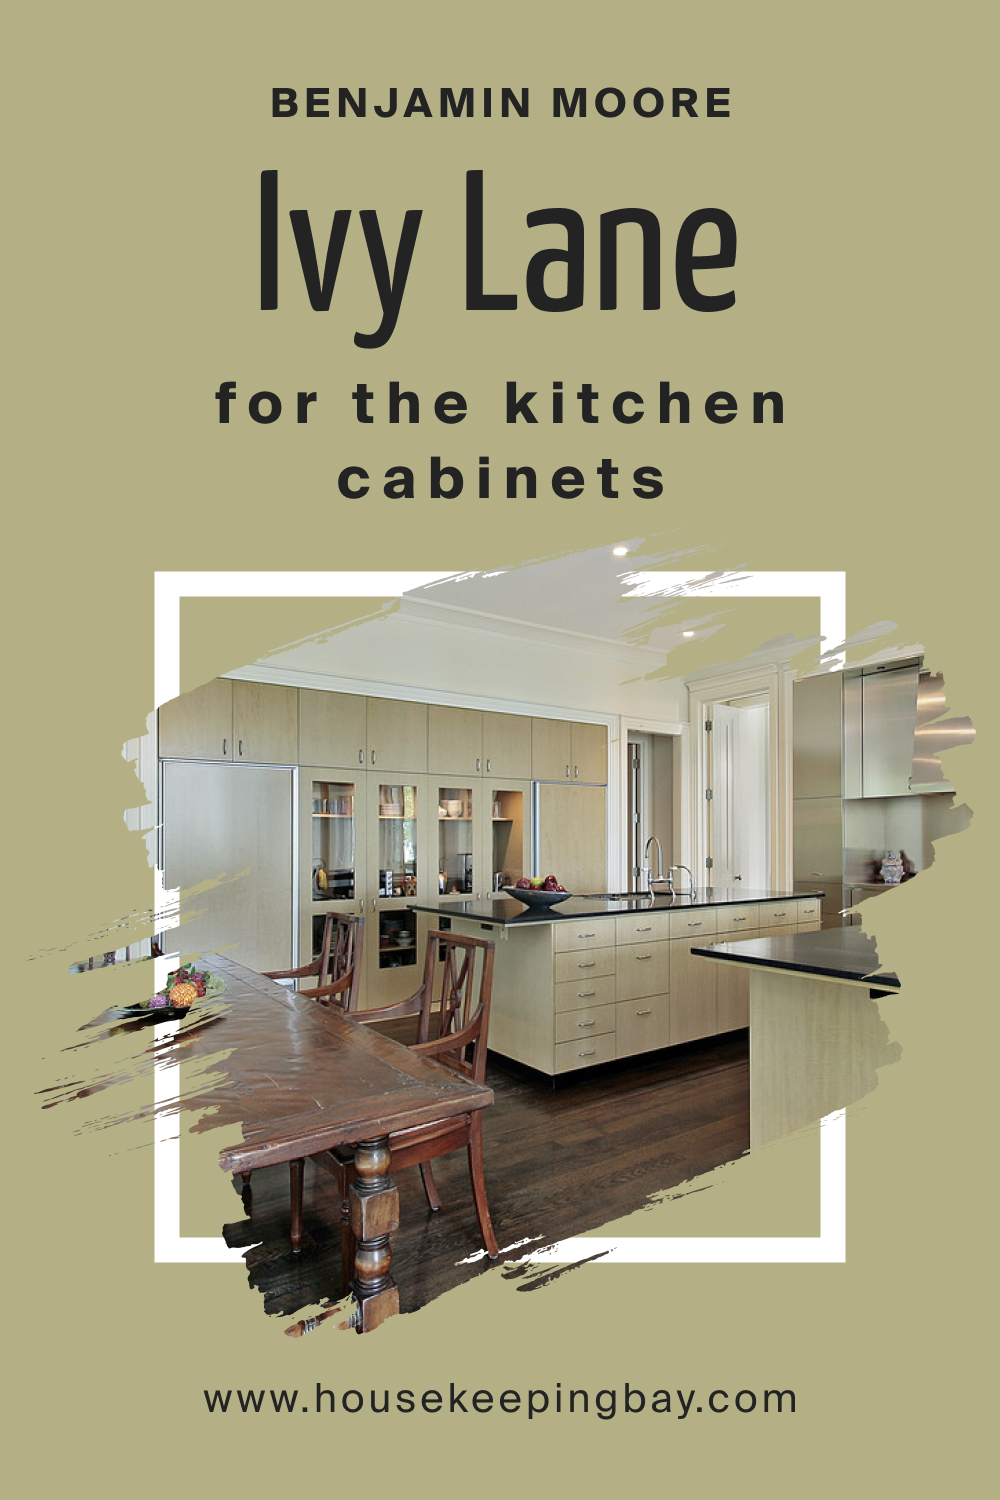 How to Use BM Ivy Lane 523 on Kitchen Cabinets?